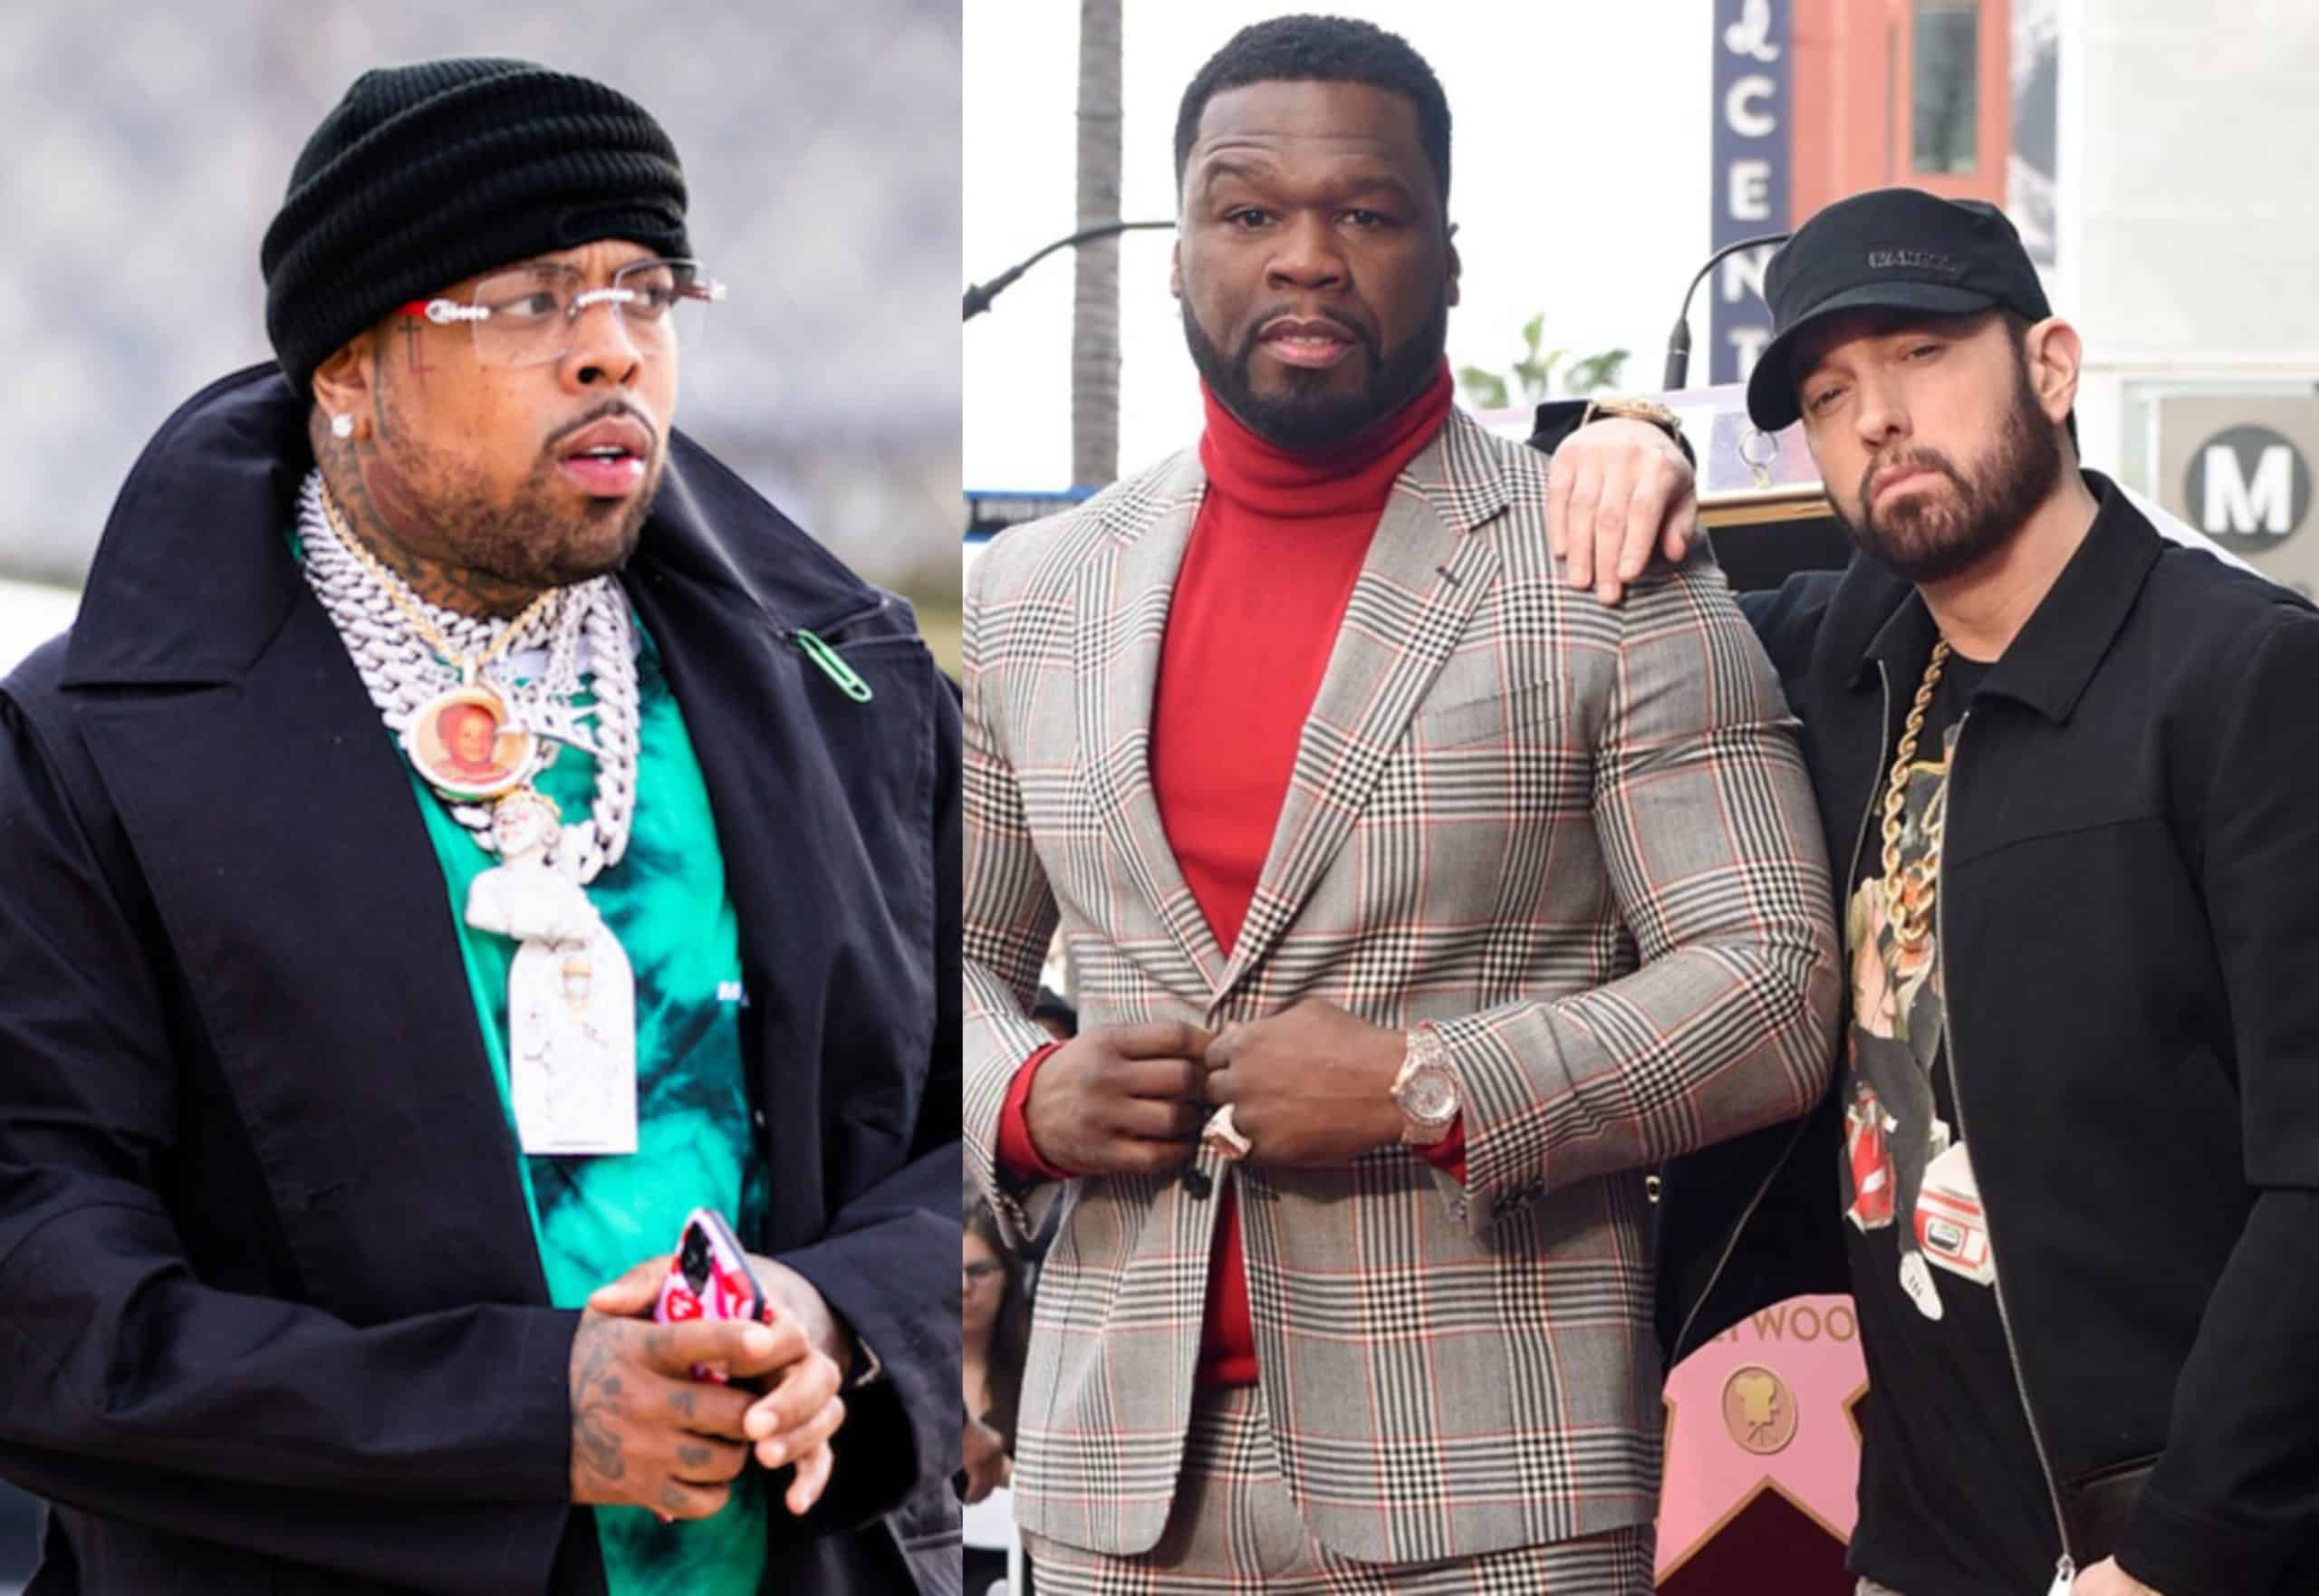 Westside Gunn Says Griselda's Story Is Better Than Eminem and 50 Cent's